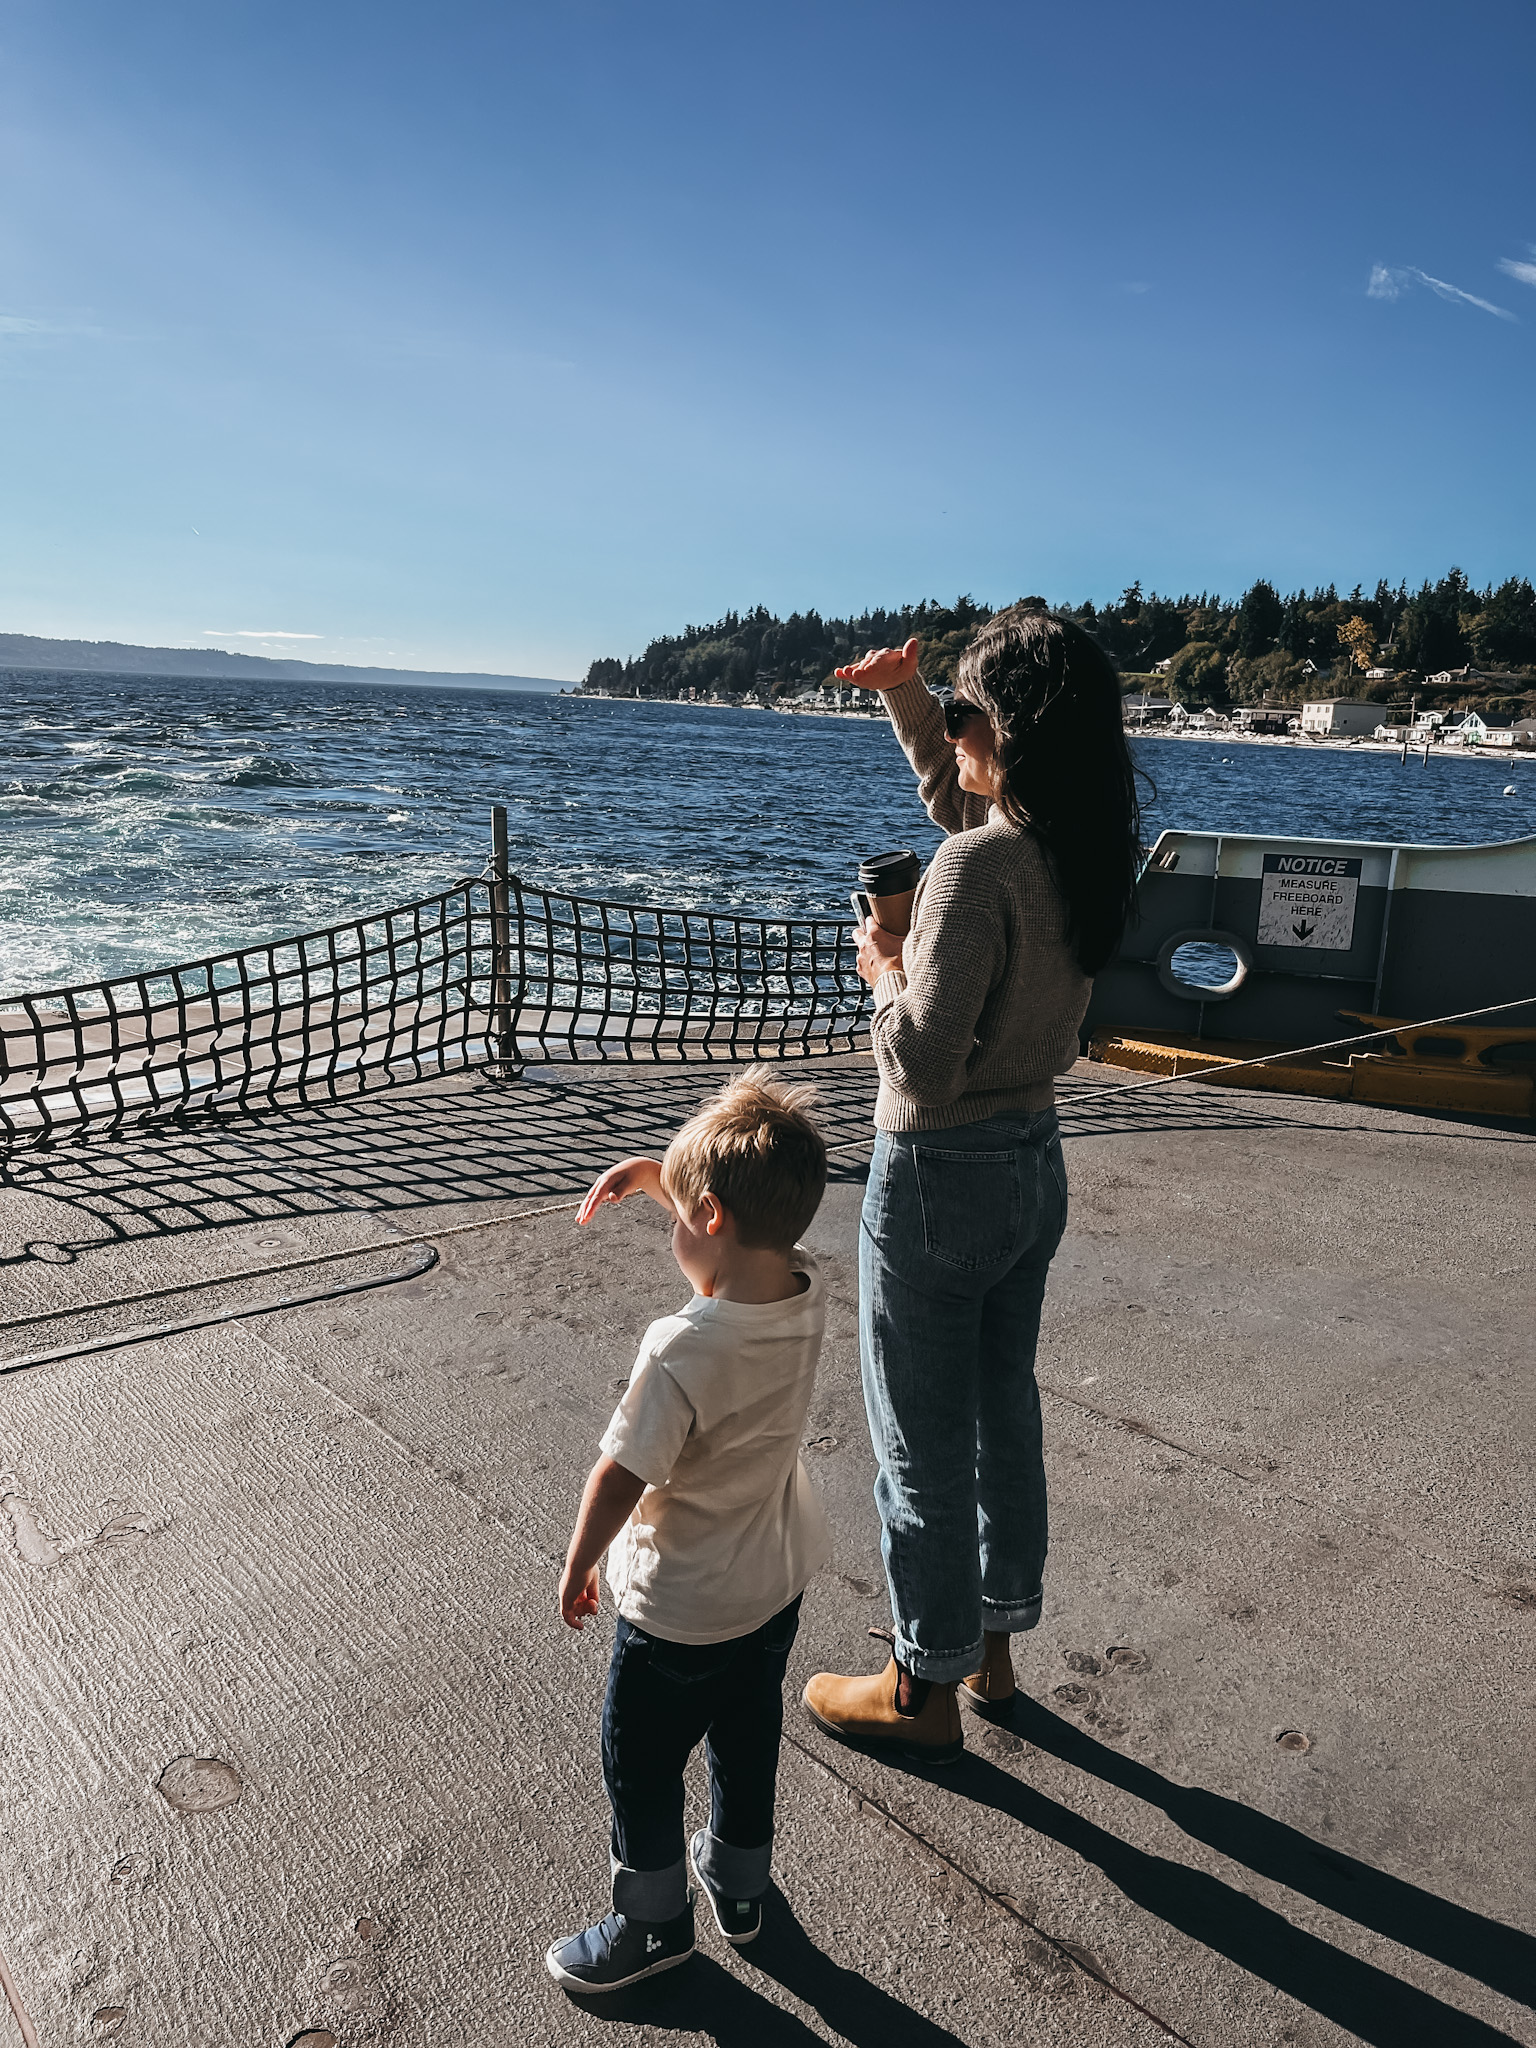 A Week On Whidbey Island